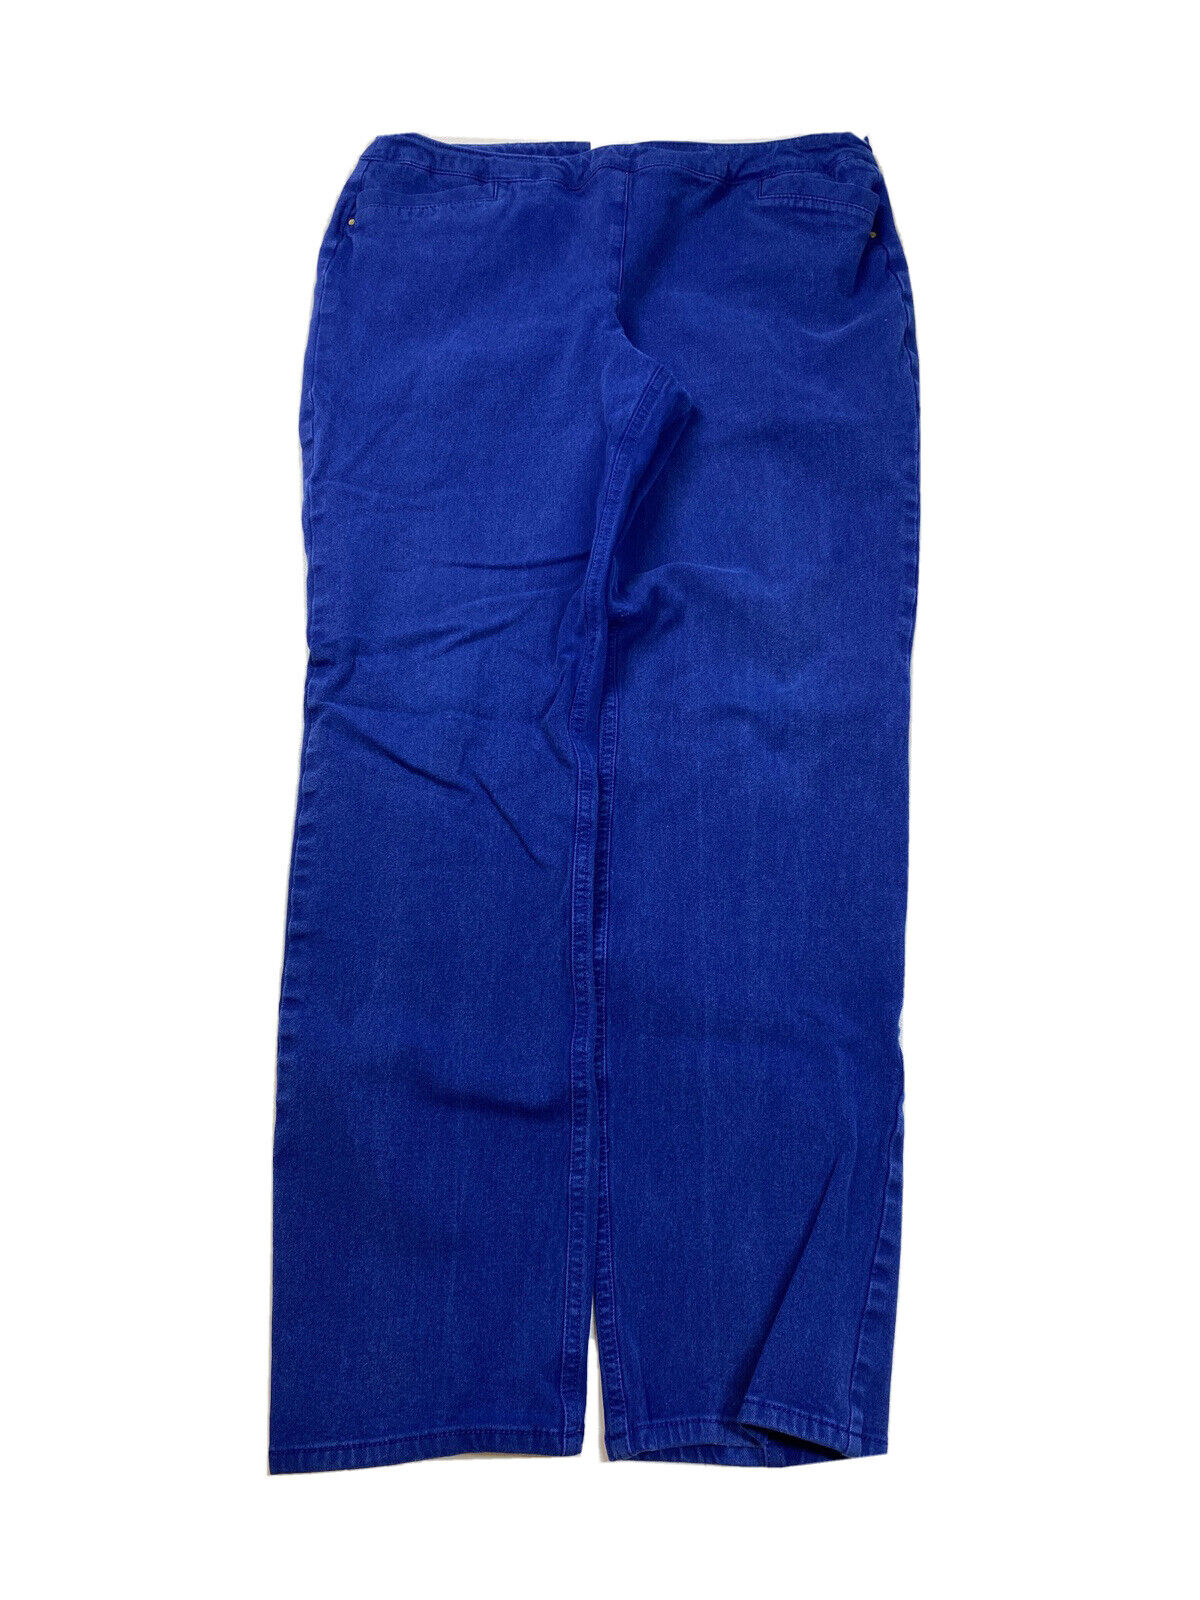 So Slimming by Chico's Women's Blue Pull On Denim Pants - 2 Tall (US 12)